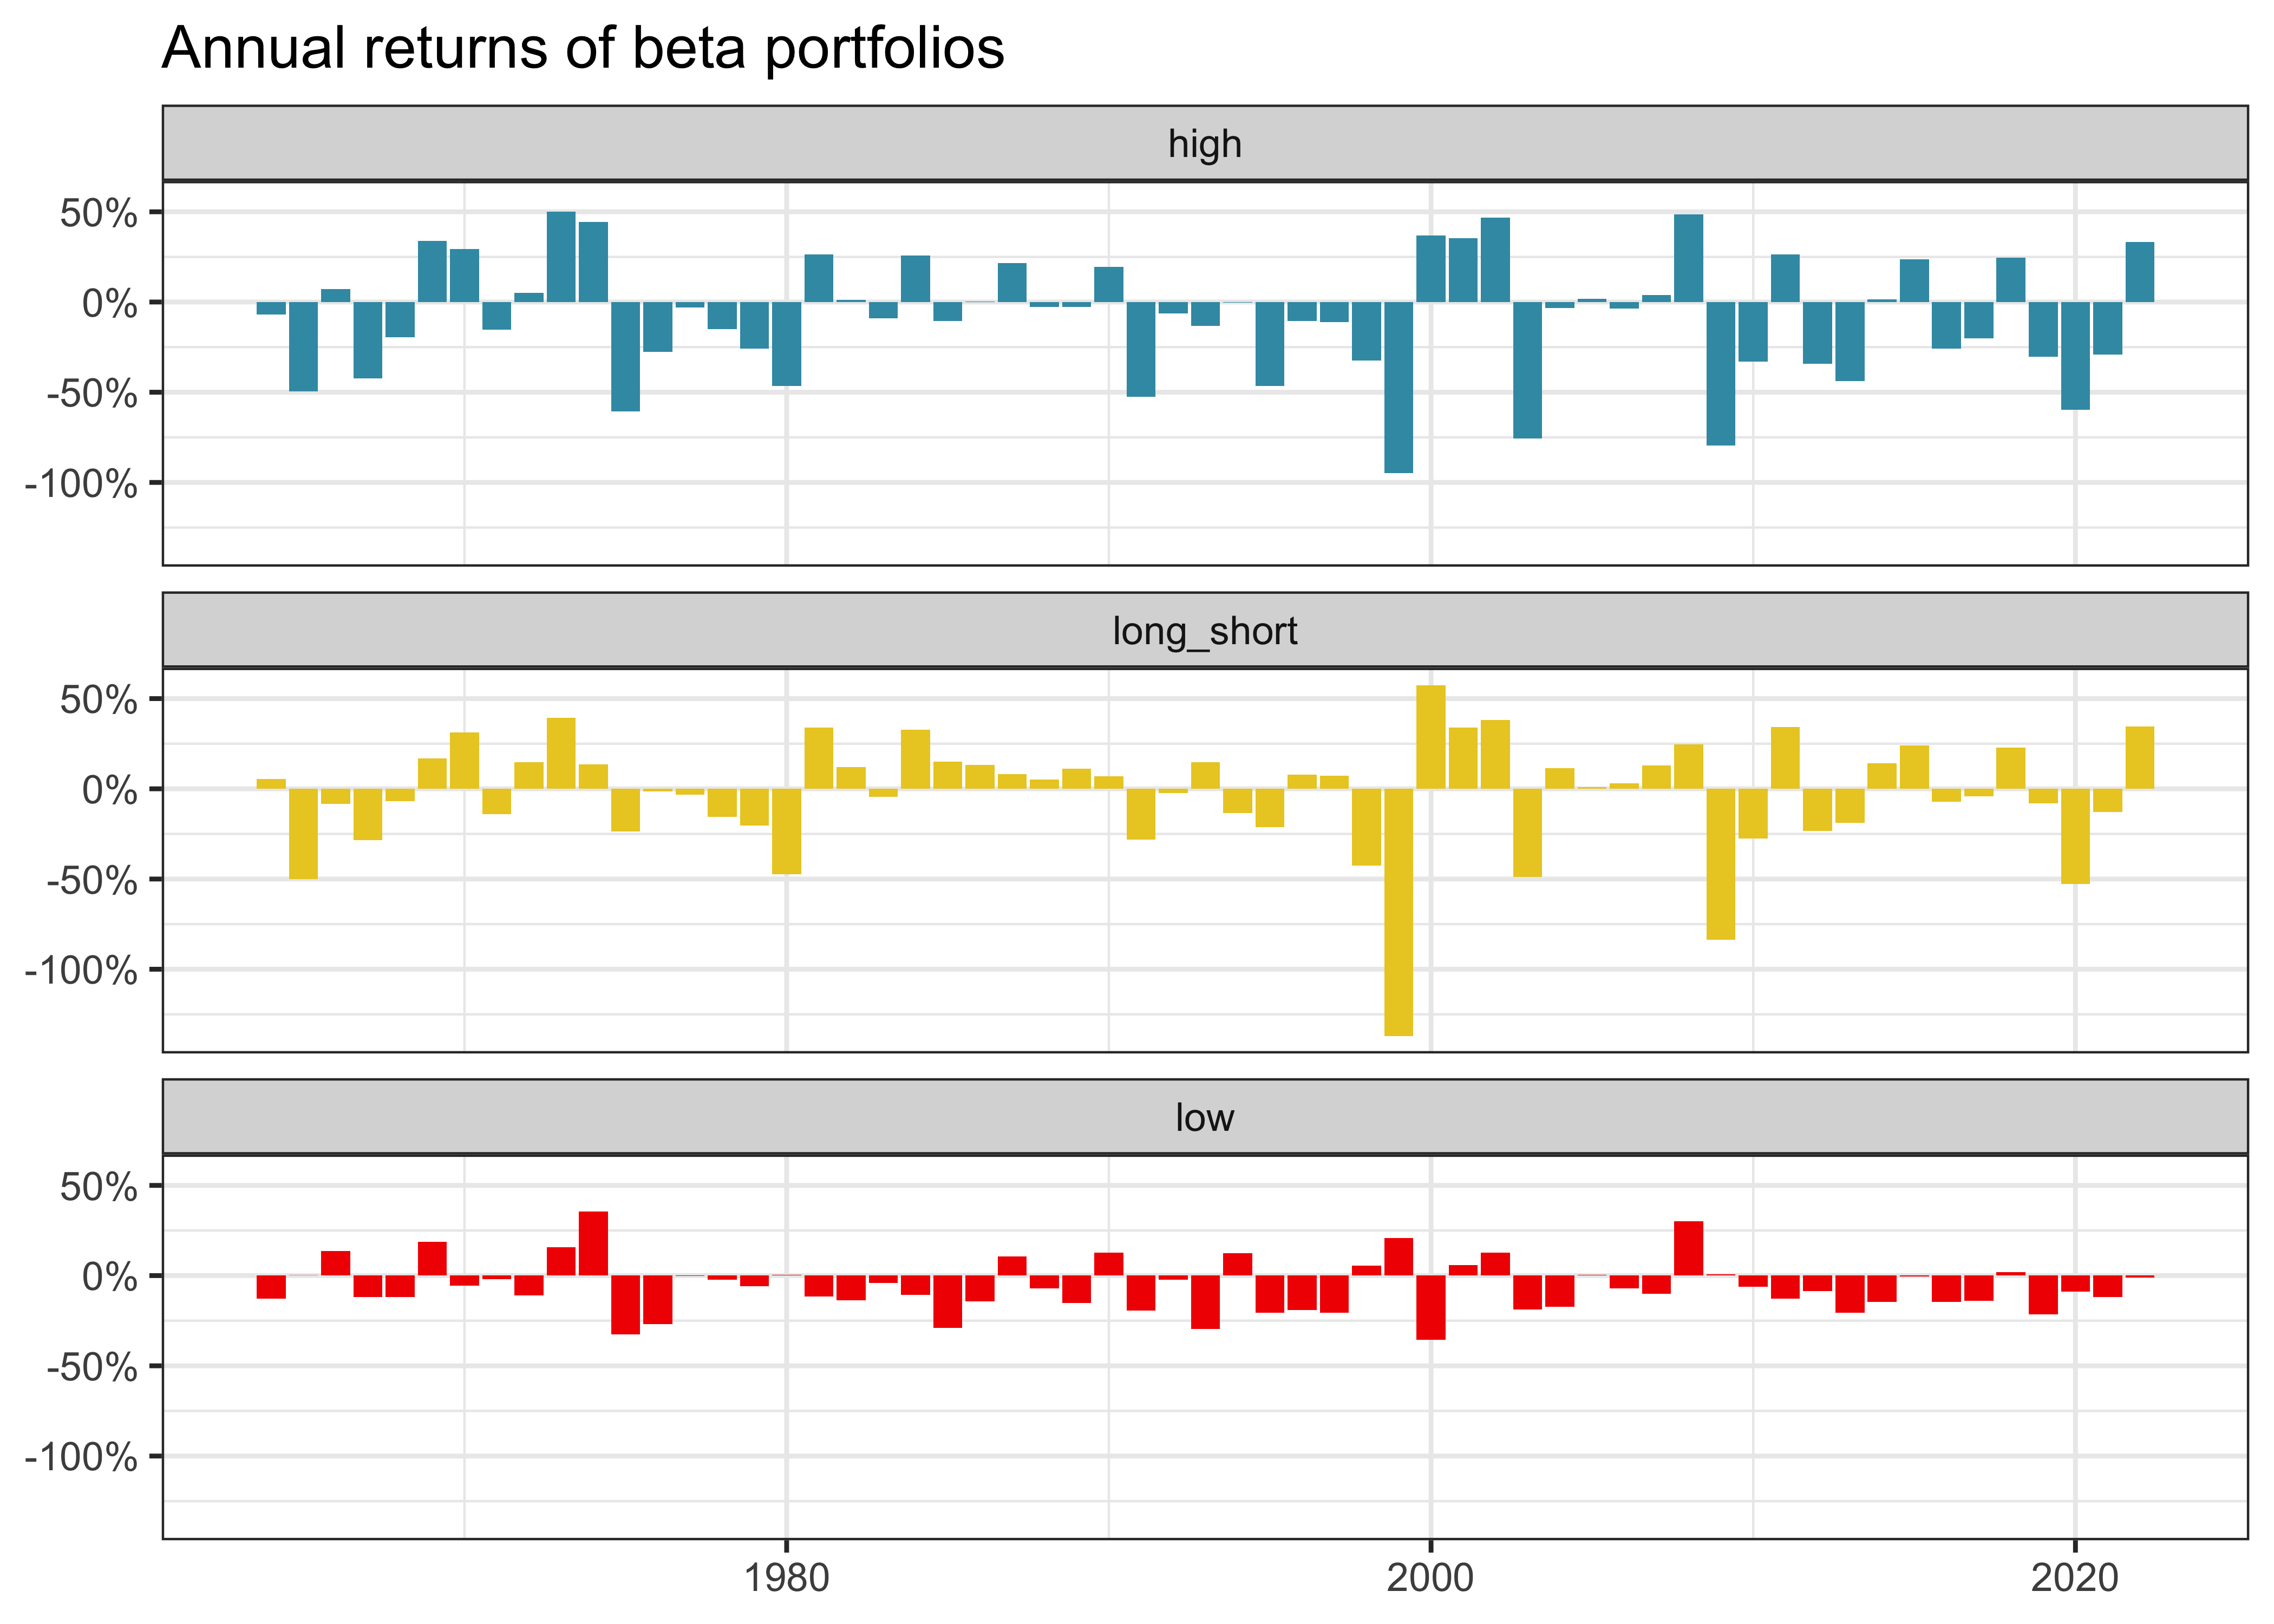 Title: Annual returns of beta portfolios. The figure shows bar charts of annual returns of long, short, and long-short beta portfolios with years on the horizontal axis and returns on the vertical axis. Each portfolio is plotted in its own facet. The long-short portfolio strategy delivers very high losses during some periods.